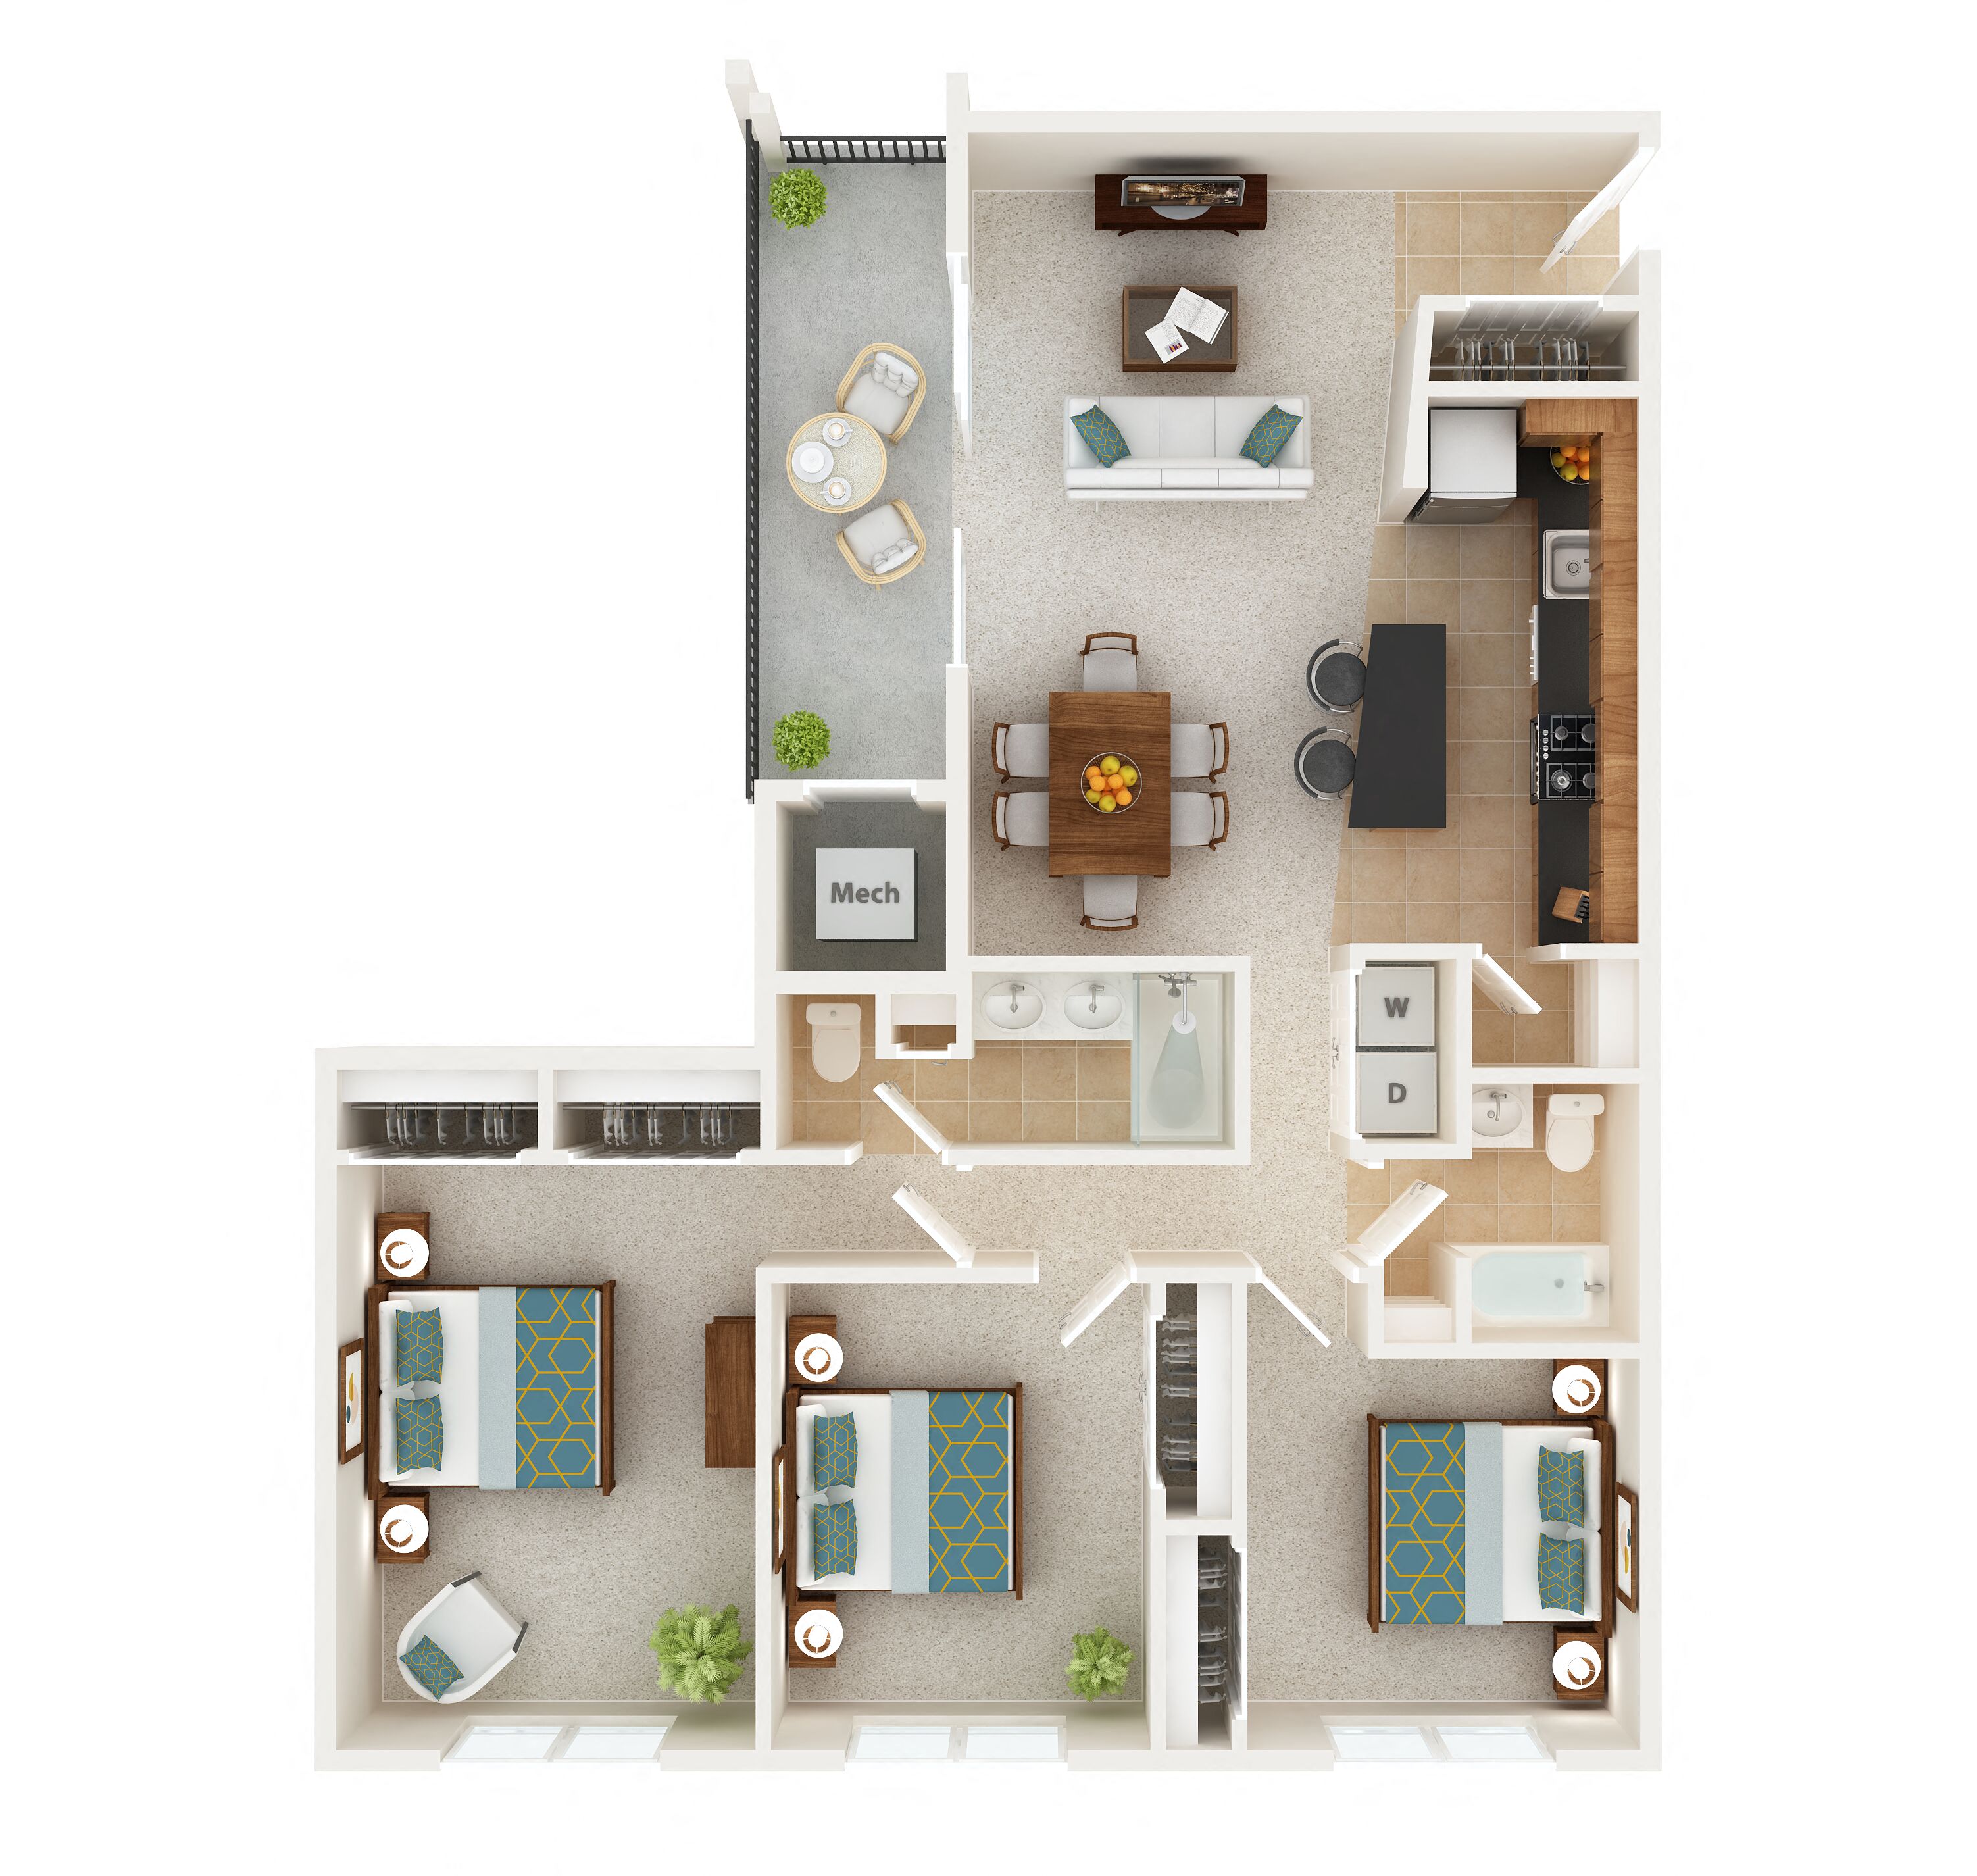 Floor Plans of Spa Cove Apartments in Annapolis, MD